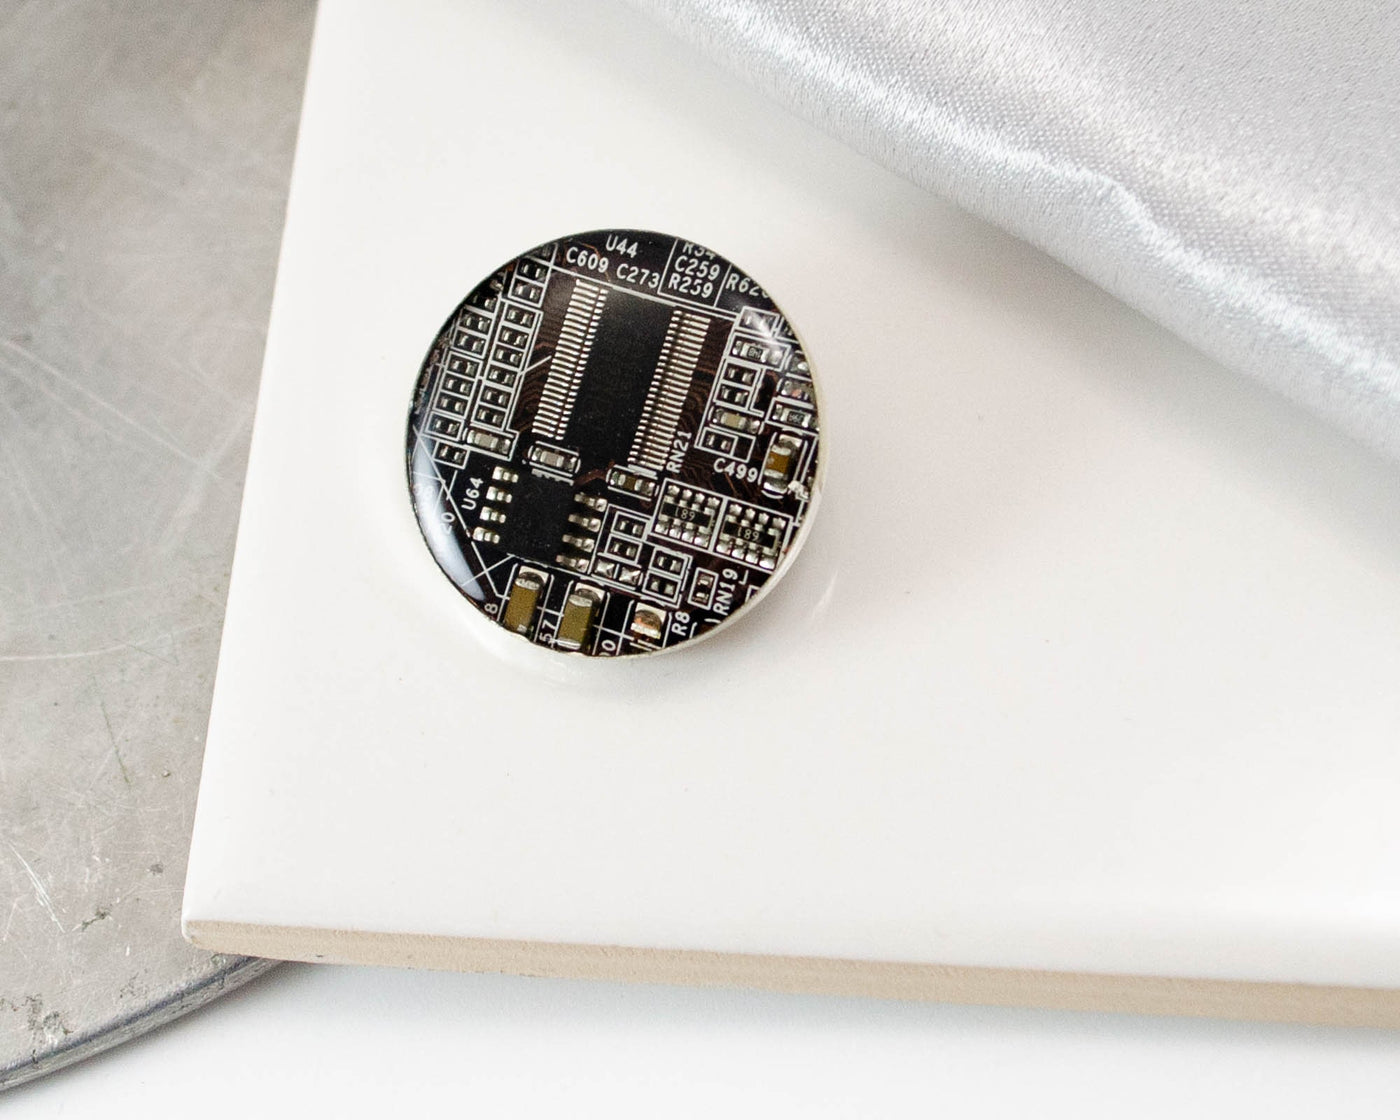 Brown Circuit Board Pin, Recycled Computer Gift, Motherboard Brooch, Electrical Engineer Gift, Computer Scientist Gift, Geek Chic